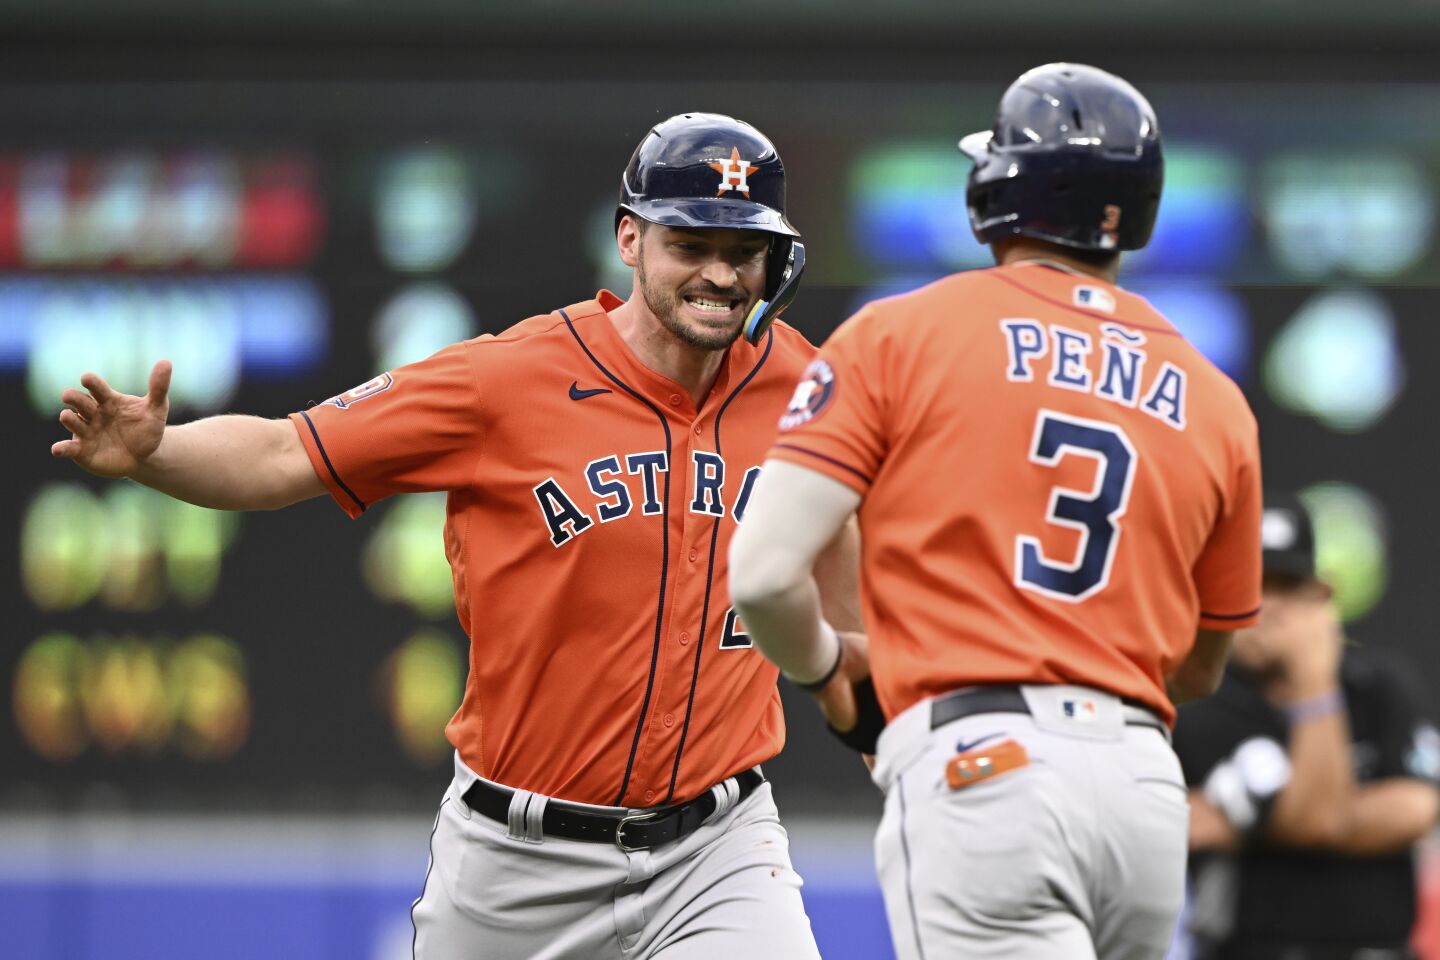 2 | Houston Astros (101-53; LW: 2)The Astros certainly have an asterisk in their recent history, but four seasons with at least 100 victories over their last five full seasons definitely made all that tanking worth it all those years ago.